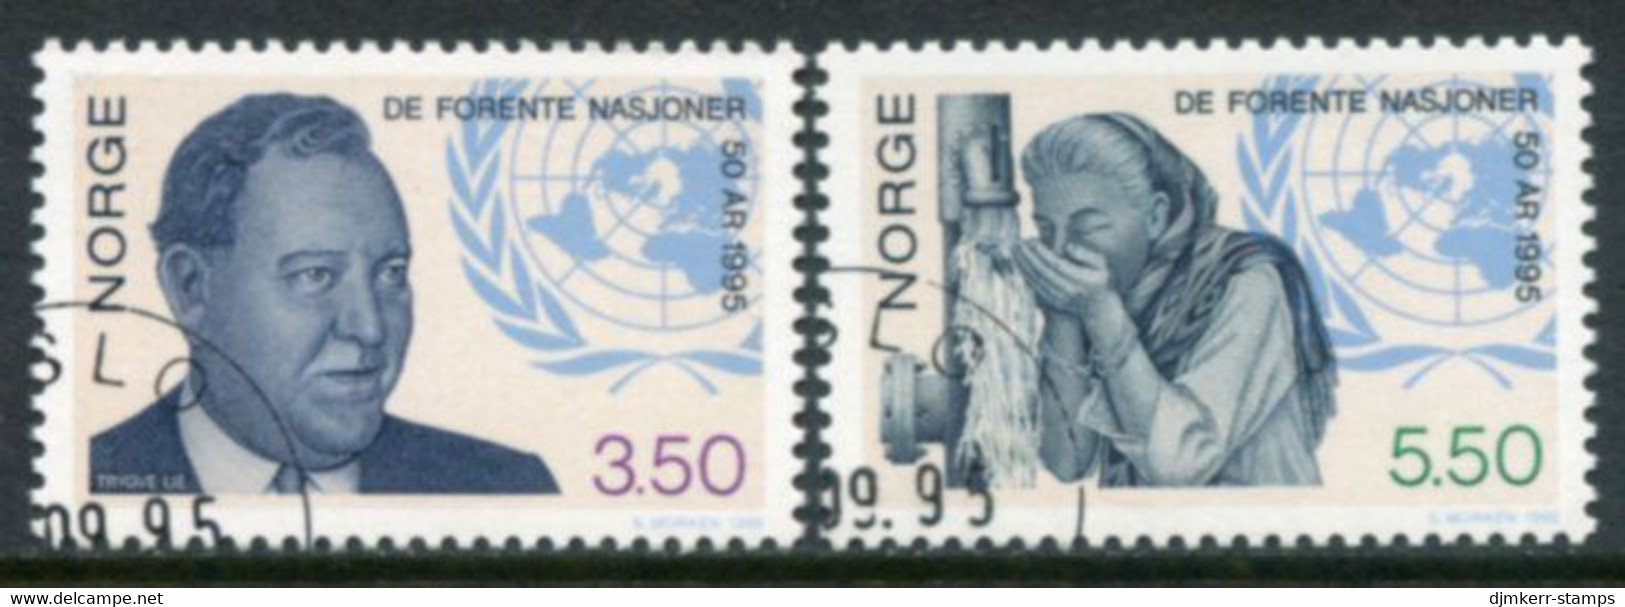 NORWAY 1995 50th Anniversary Of UNO Used.   Michel 1187-88 - Used Stamps